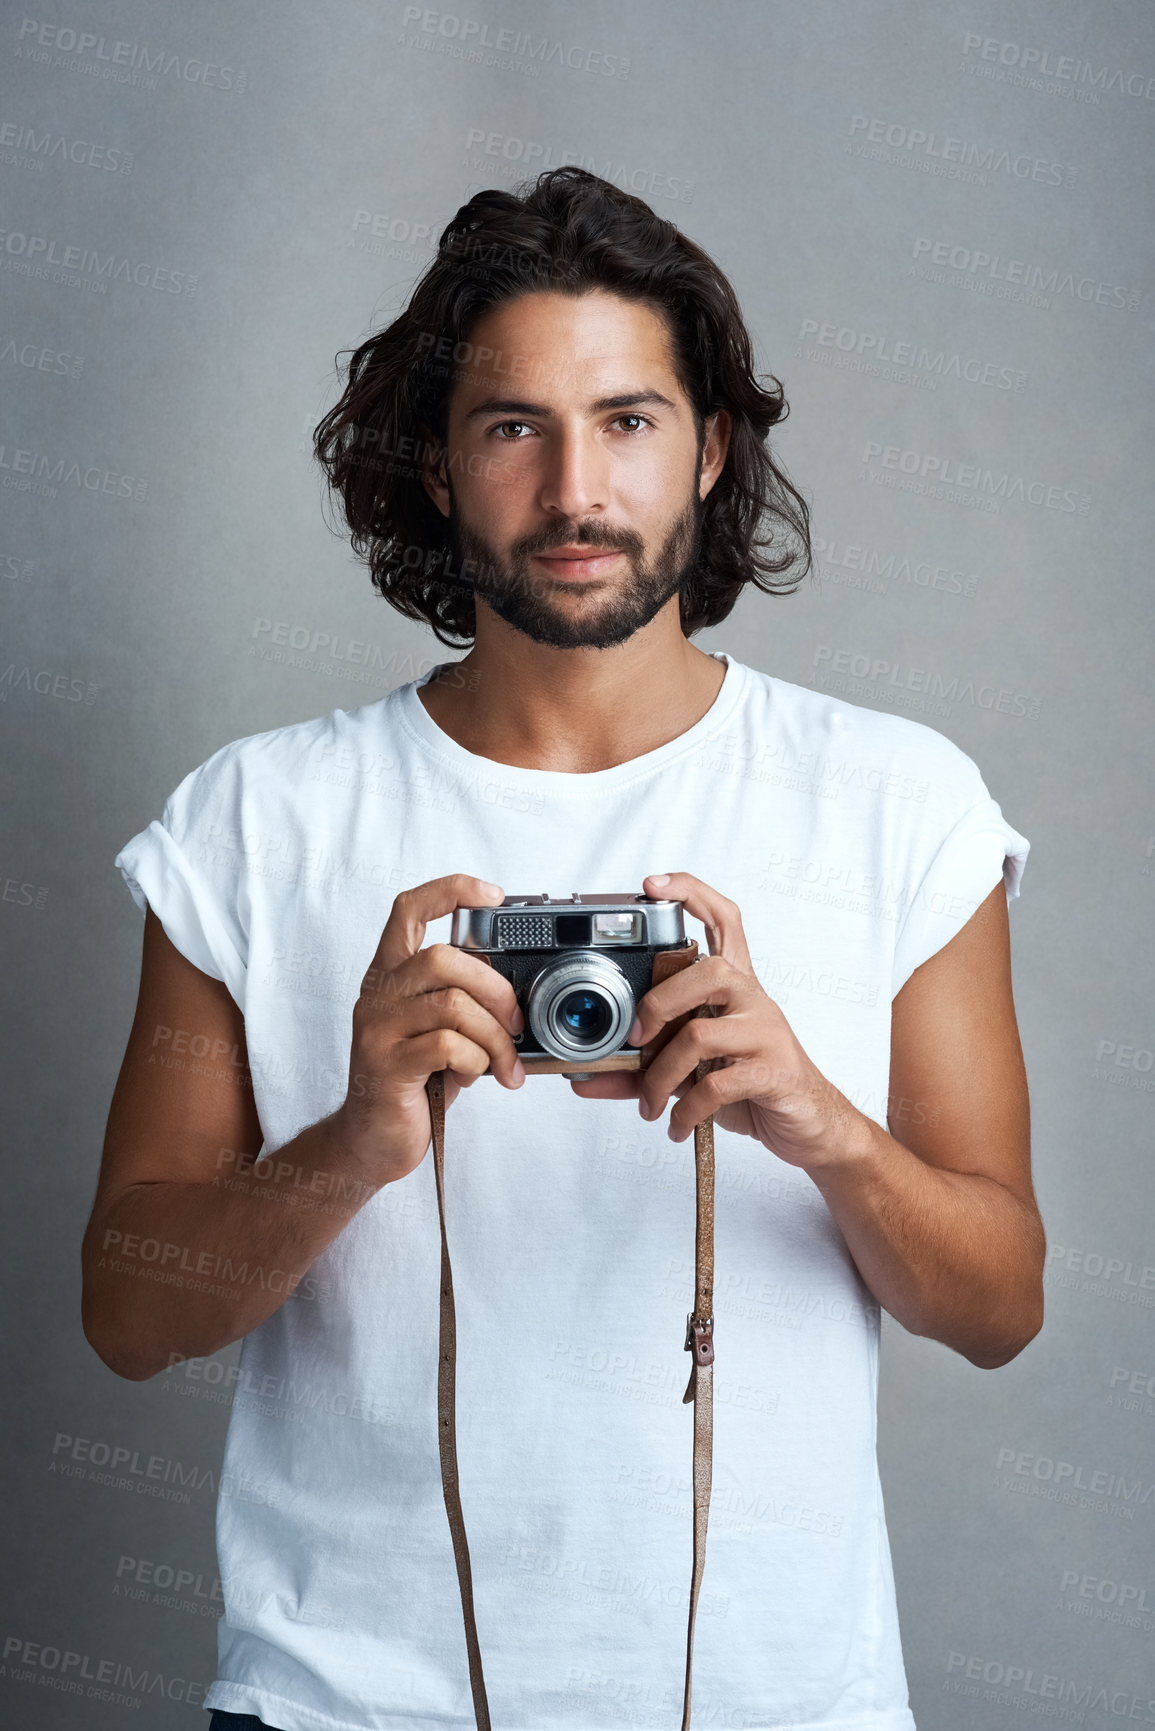 Buy stock photo Studio portrait of a young man posing with a vintage camera against a grey background